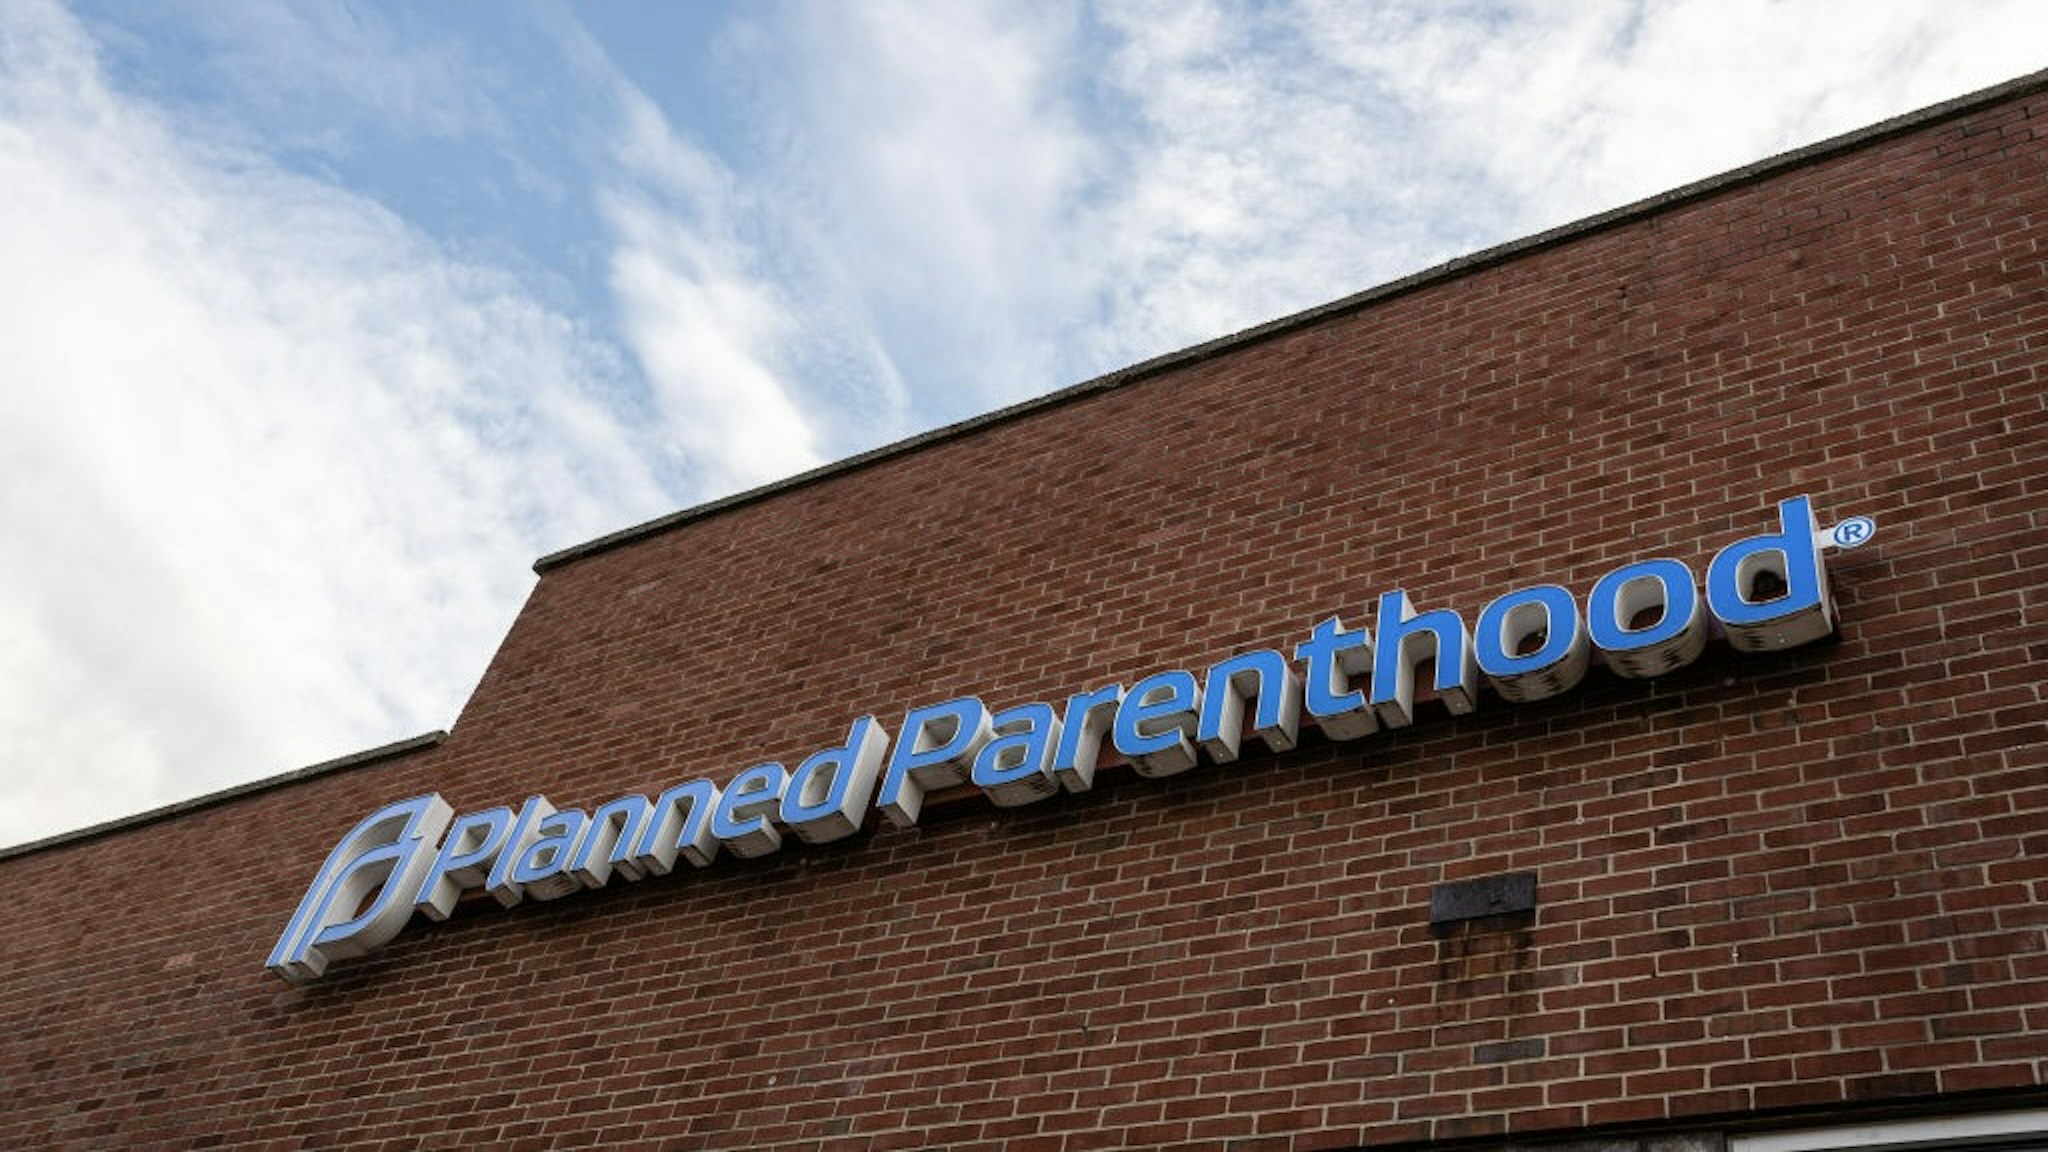 Planned Parenthood Offices Nationwide Navigate States' Legal Changes In Wake Of Supreme Court Decision To Overturn Roe v. Wade LOUISVILLE, KY - JULY 09: A Planned Parenthood Health Center is seen on July 9, 2022 in Louisville, Kentucky. Planned Parenthood provides many health services, including abortions, which are currently legal in Kentucky after the U.S. Supreme Courts decision ruling in favor of Dobbs v. Jackson Womens Health Organization which effectively overturned the 1973 Roe v. Wade decision. Kentuckys two abortion providers, Planned Parenthood and the Louisville EMW Womens Surgical Center are arguing that the Kentucky State constitution guarantees a right to abortion under certain circumstances. (Photo by Jon Cherry/Getty Images) Jon Cherry / Stringer